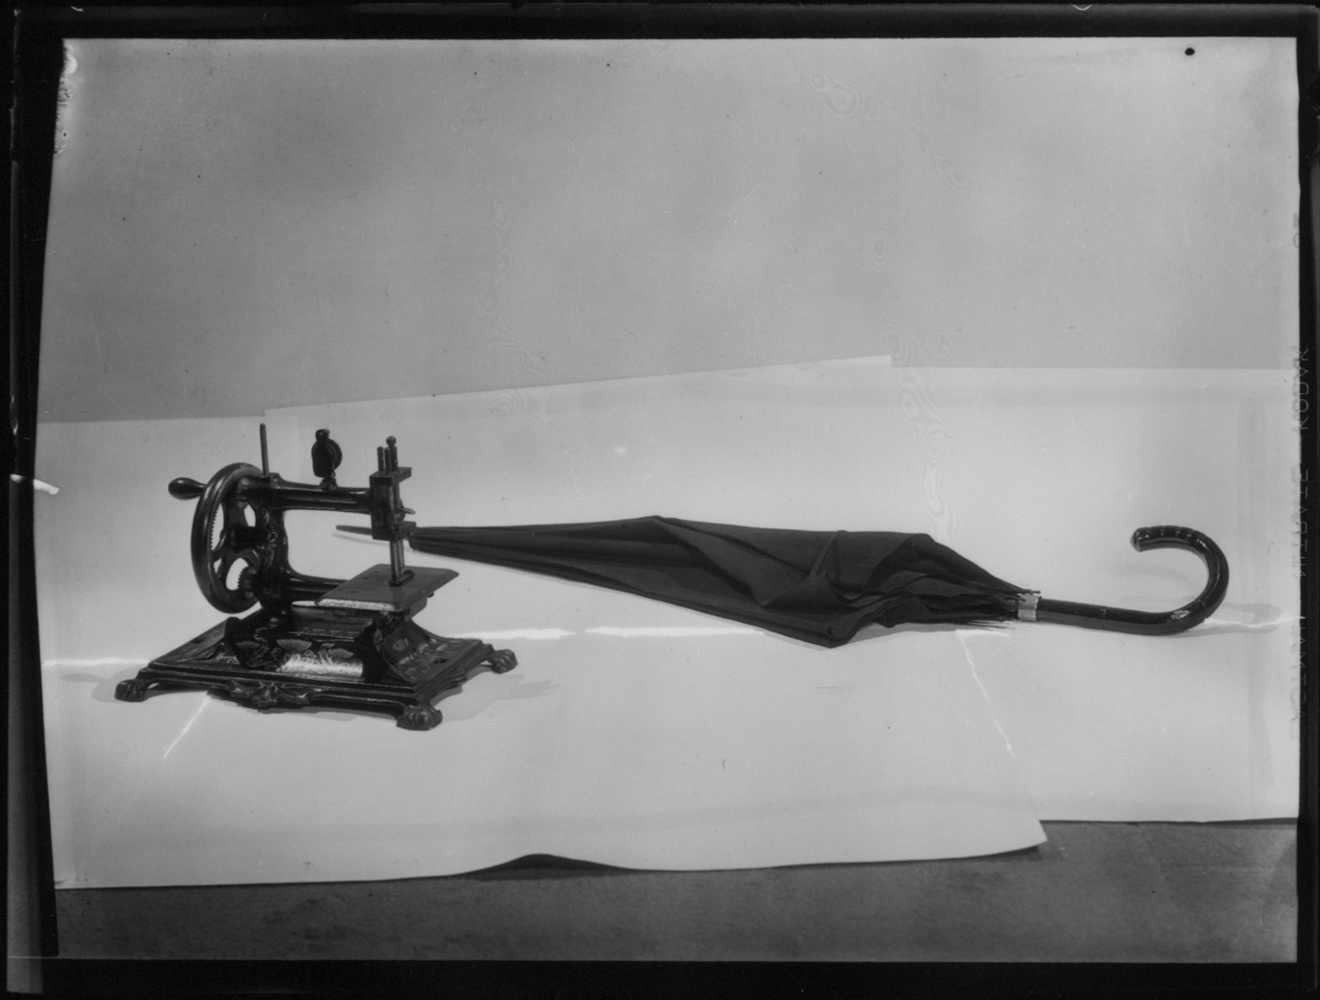 Beautiful as the accidental encounter, on a dissecting table, of a sewing machine and an umbrella, 1935